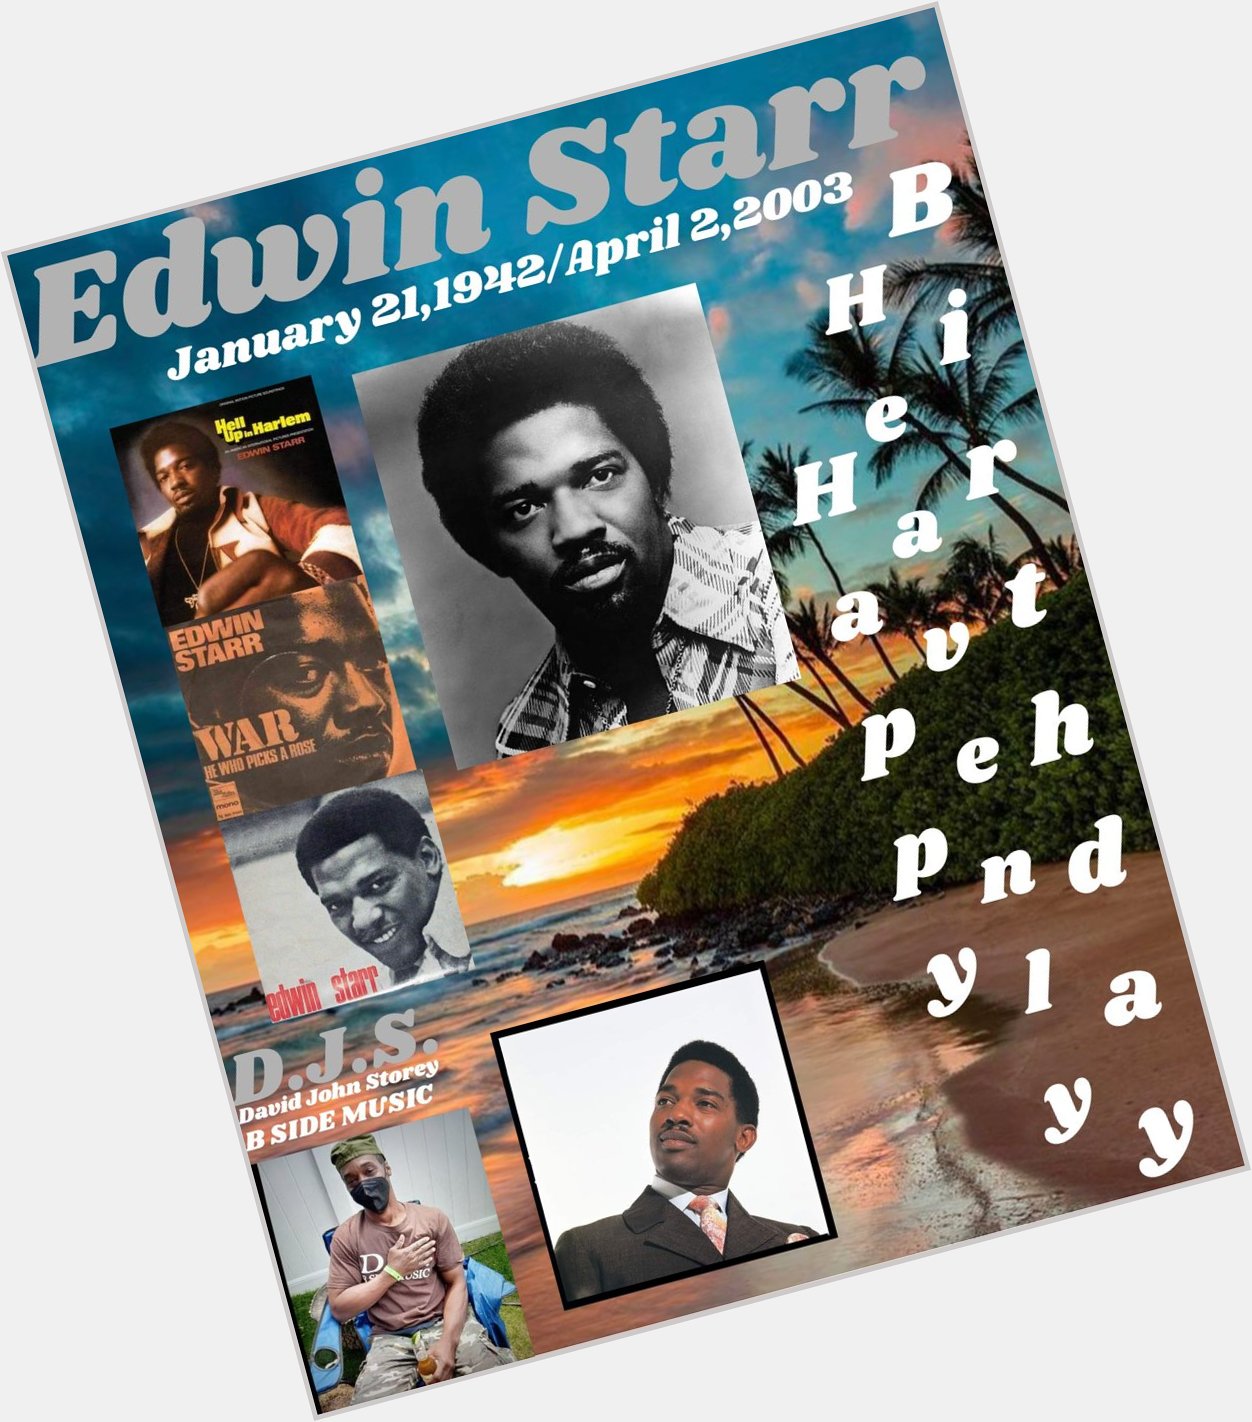 I(D.J.S.)\"B SIDE NY\" taking time to say Happy Heavenly Birthday to Singer/Songwriter: \"EDWIN STARR\". 